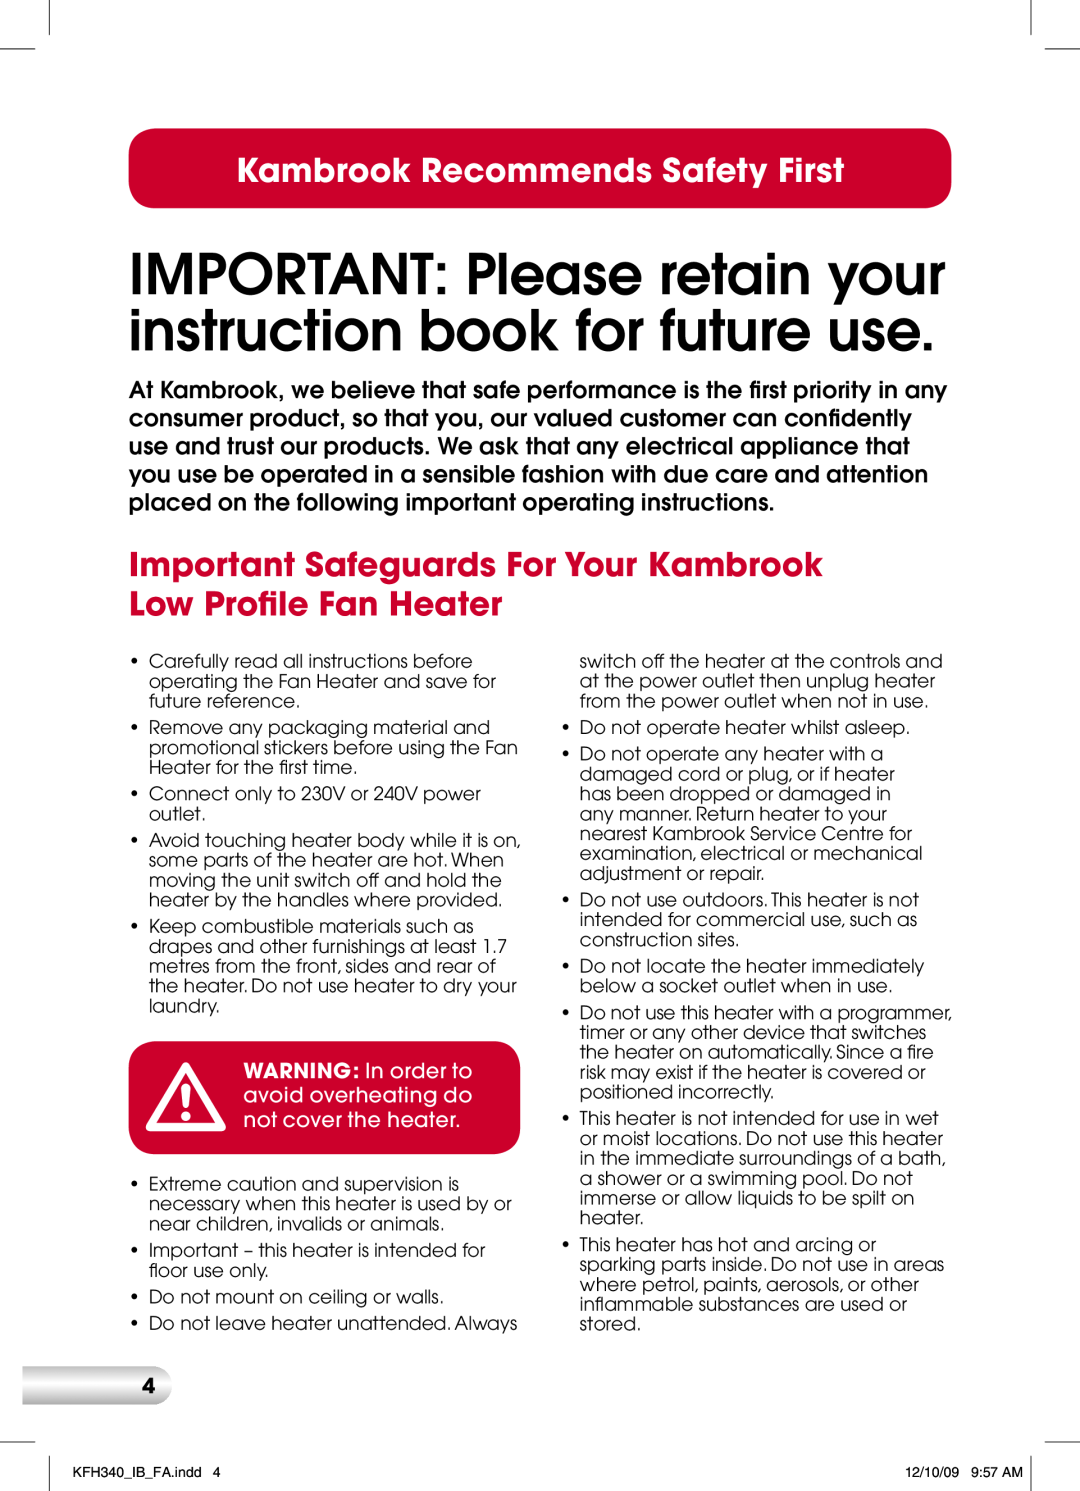 Kambrook KFH340 manual Kambrook Recommends Safety First 